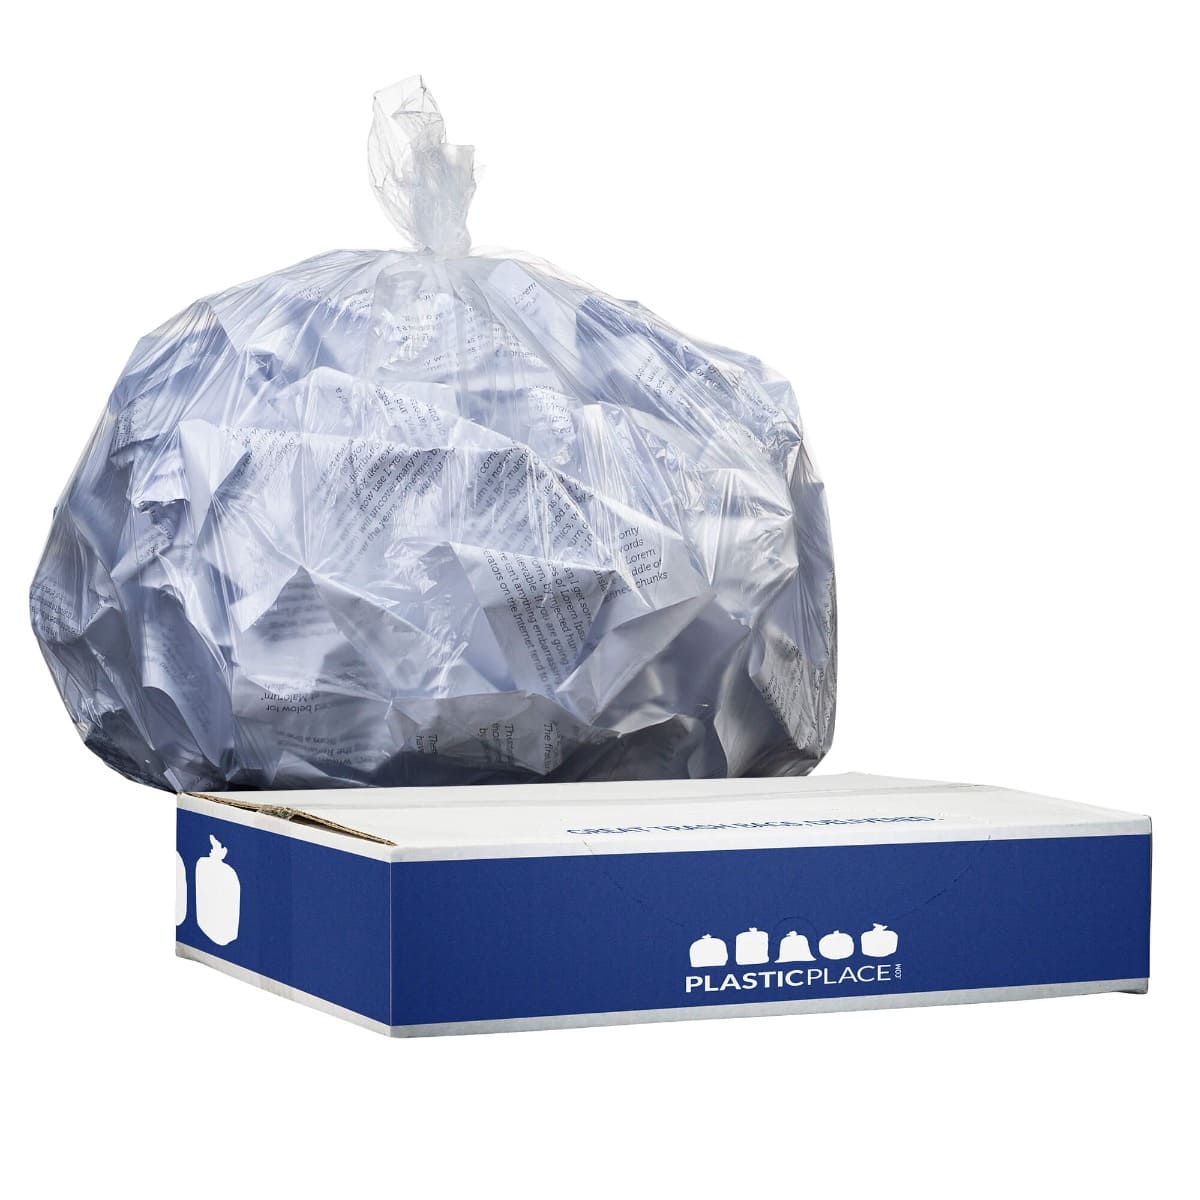 7-10 Gallon High Density Bags - 20% Price Reduction - Plasticplace